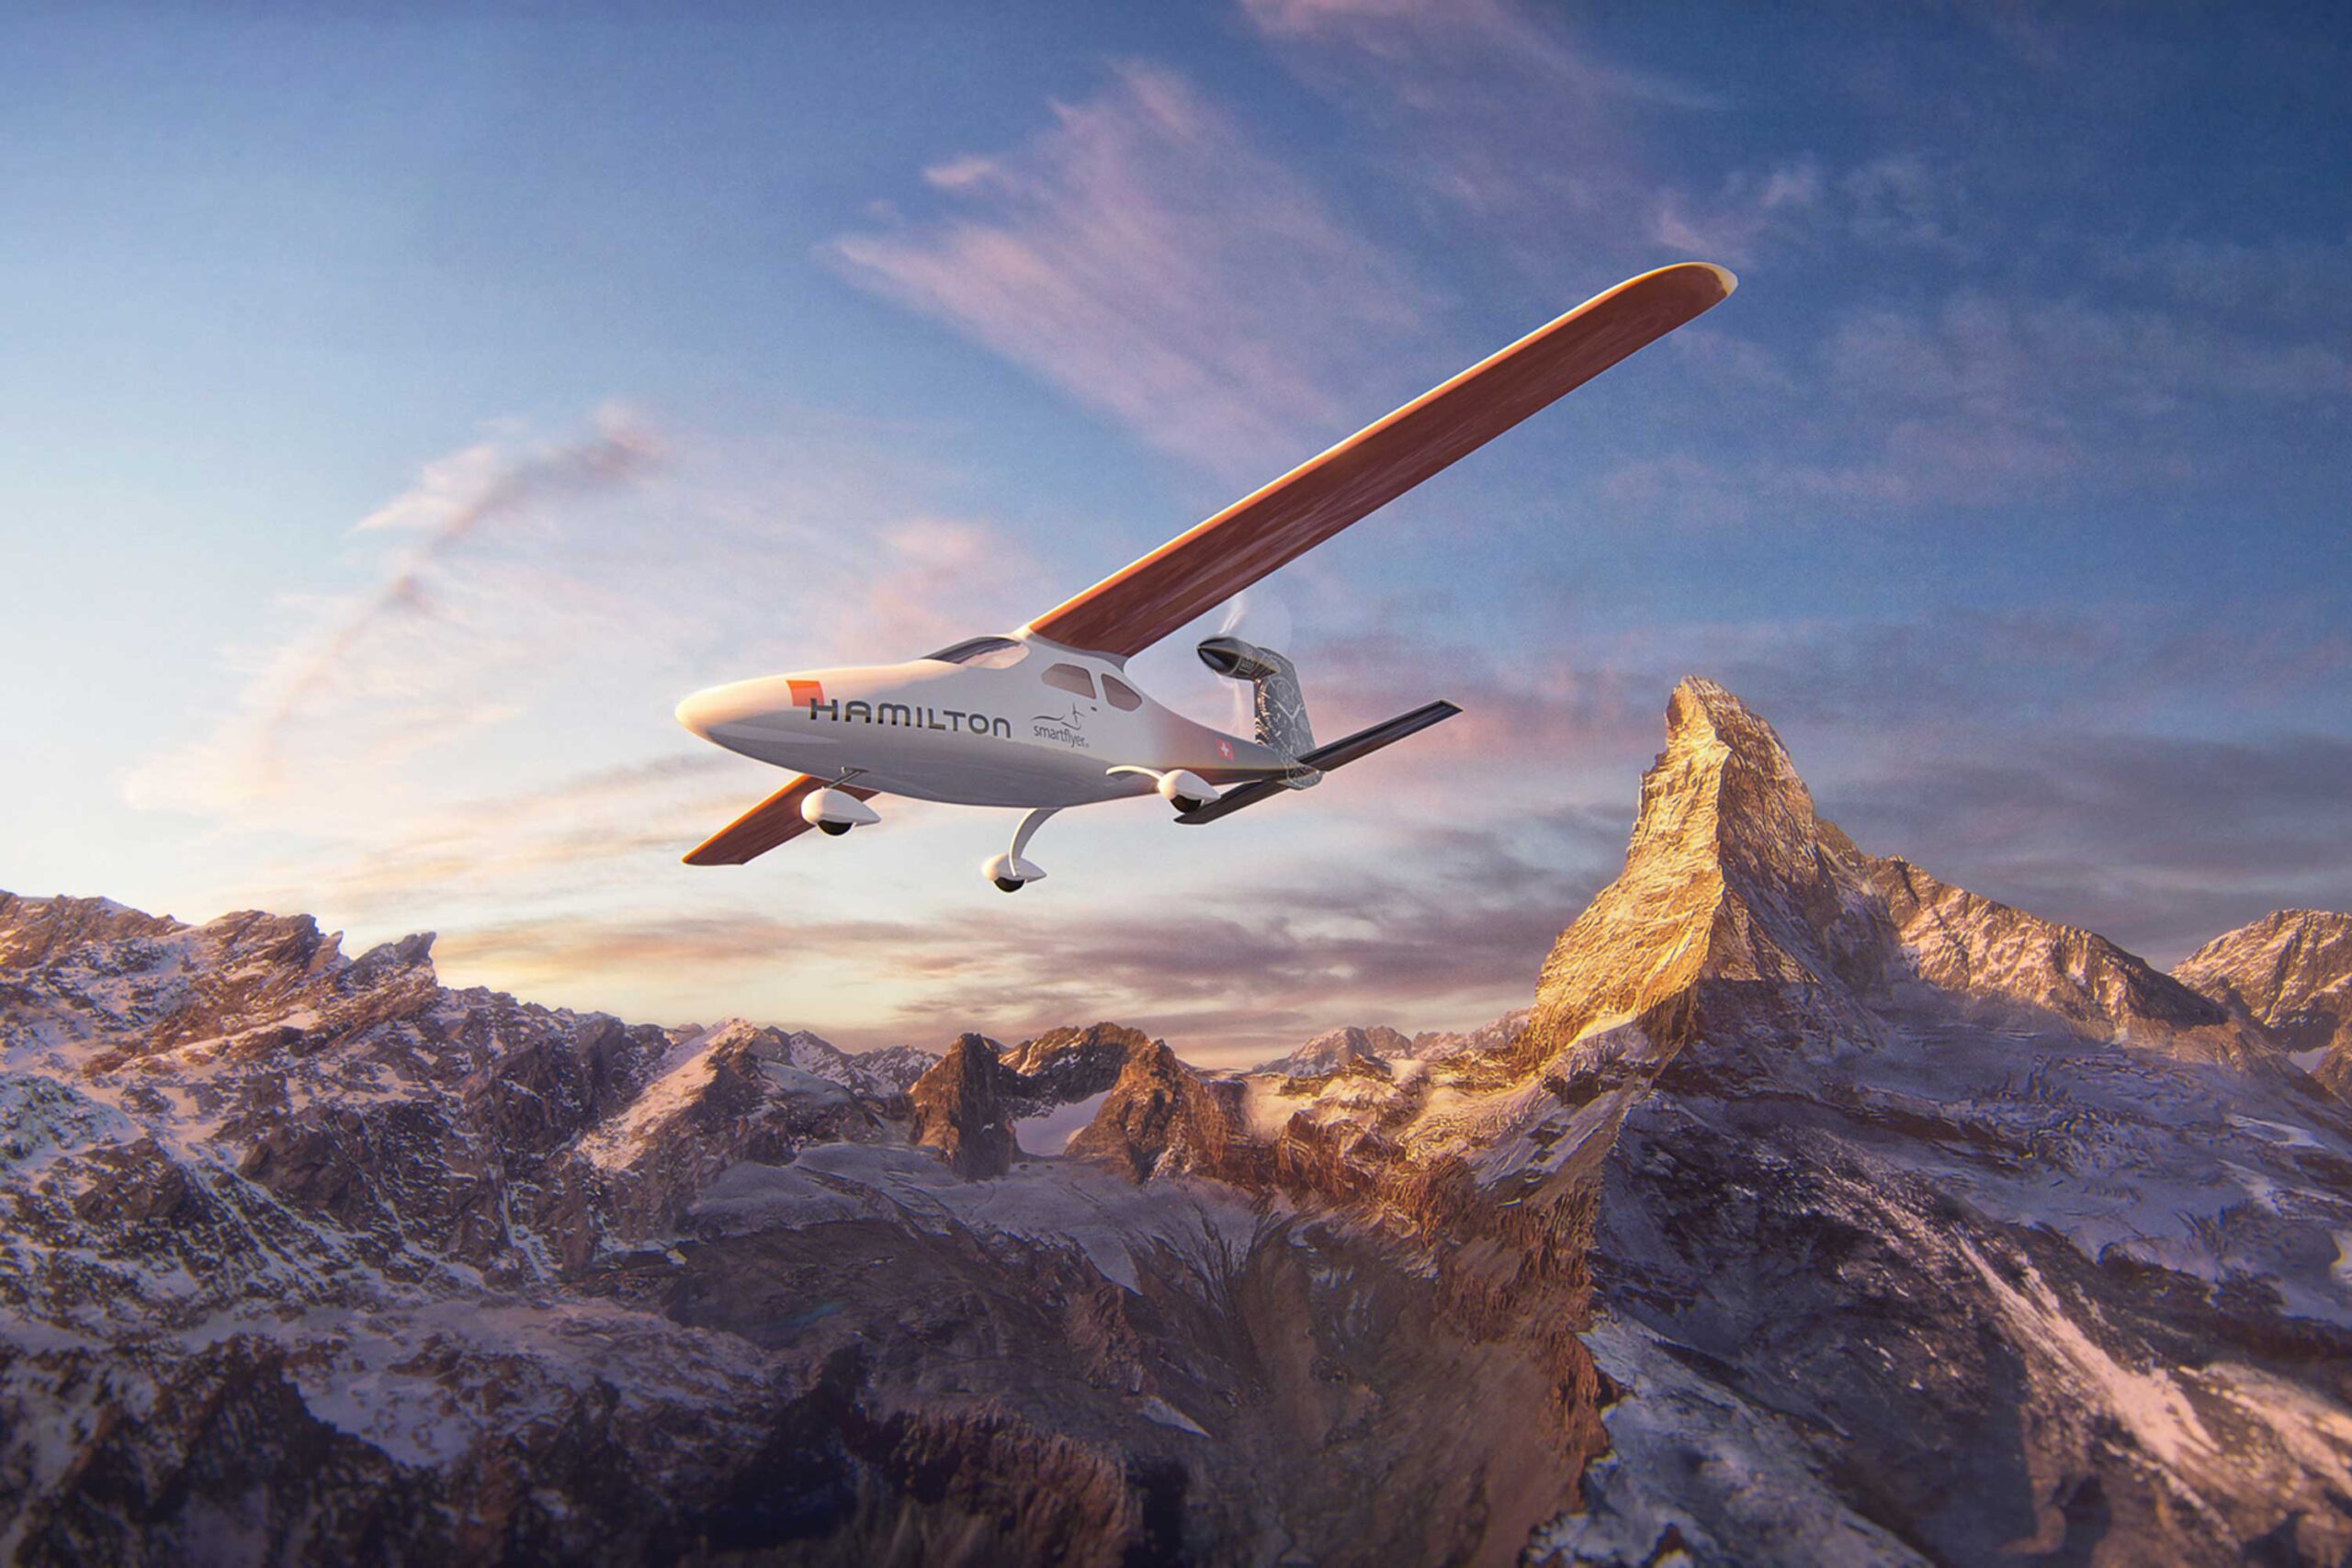 The Smartflyer is a four-seat aircraft that uses electric technology to generate 50 percent less carbon dioxide, 60 percent less noise, and costs 33 percent less to fuel and maintain than traditional small planes.